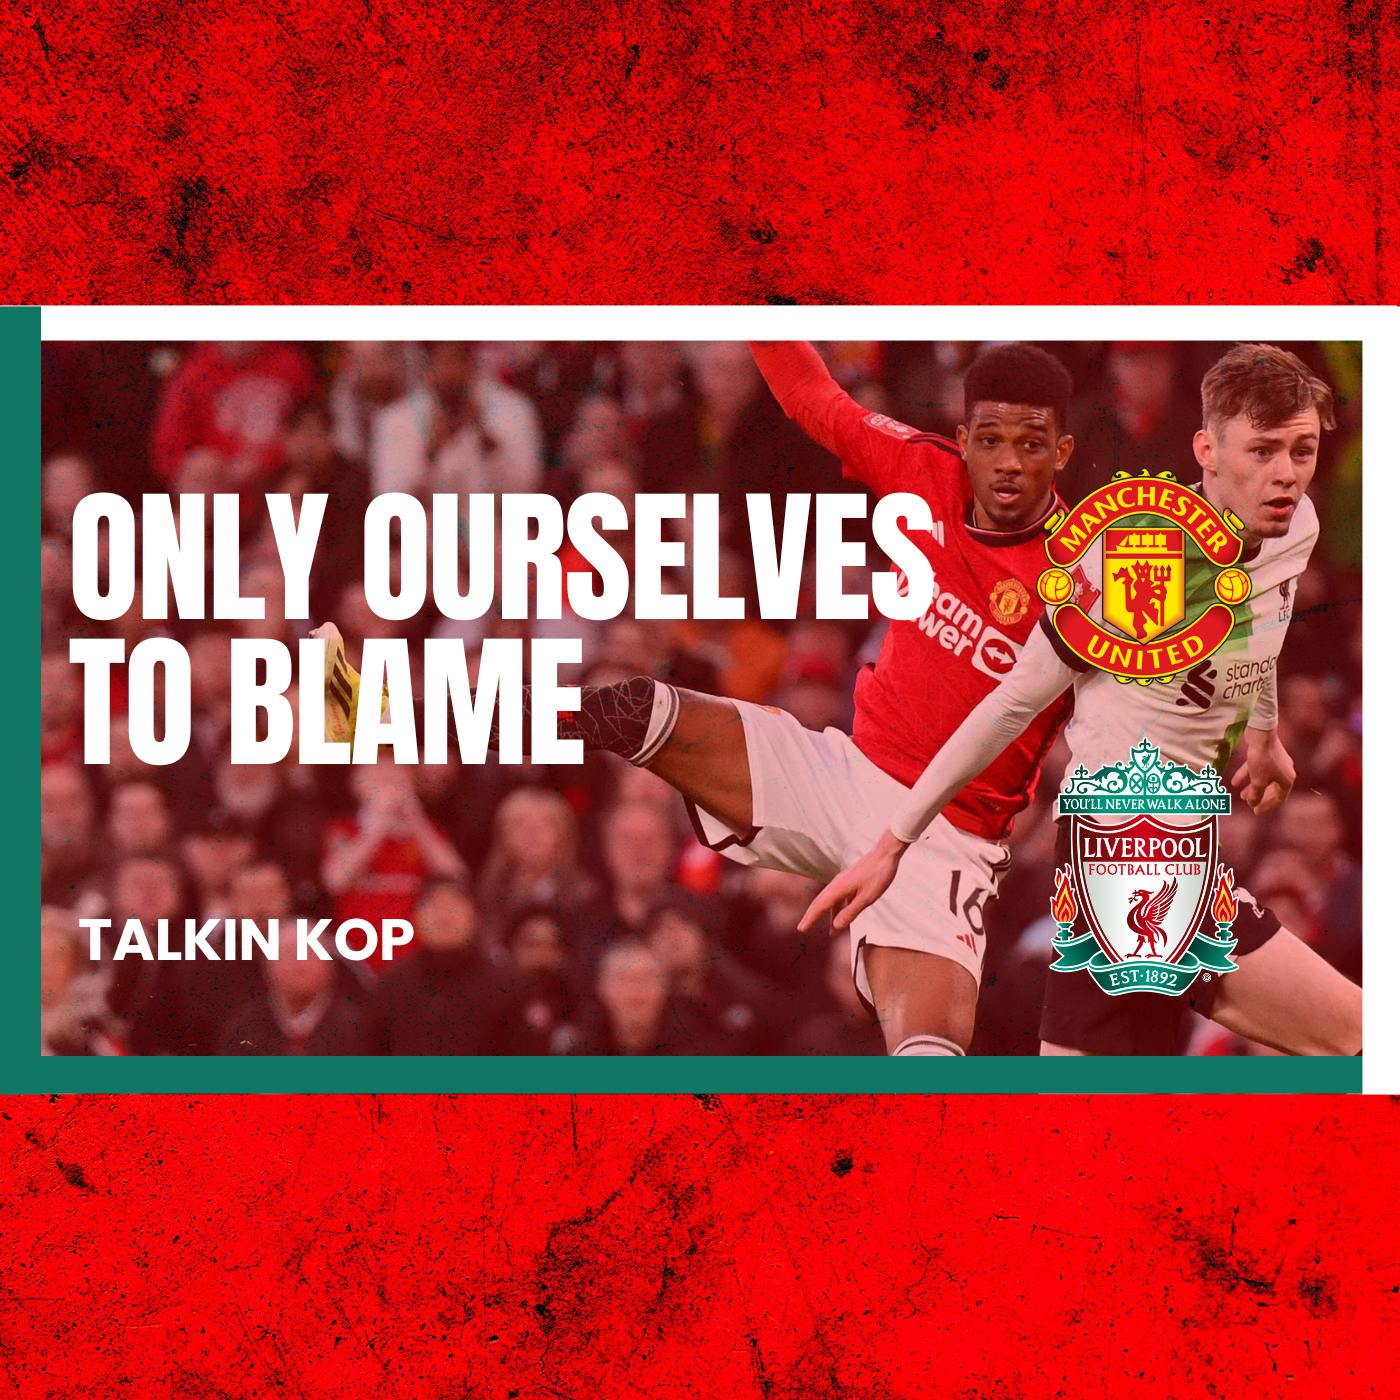 Only Ourselves To Blame | Man Utd 4 Liverpool 3